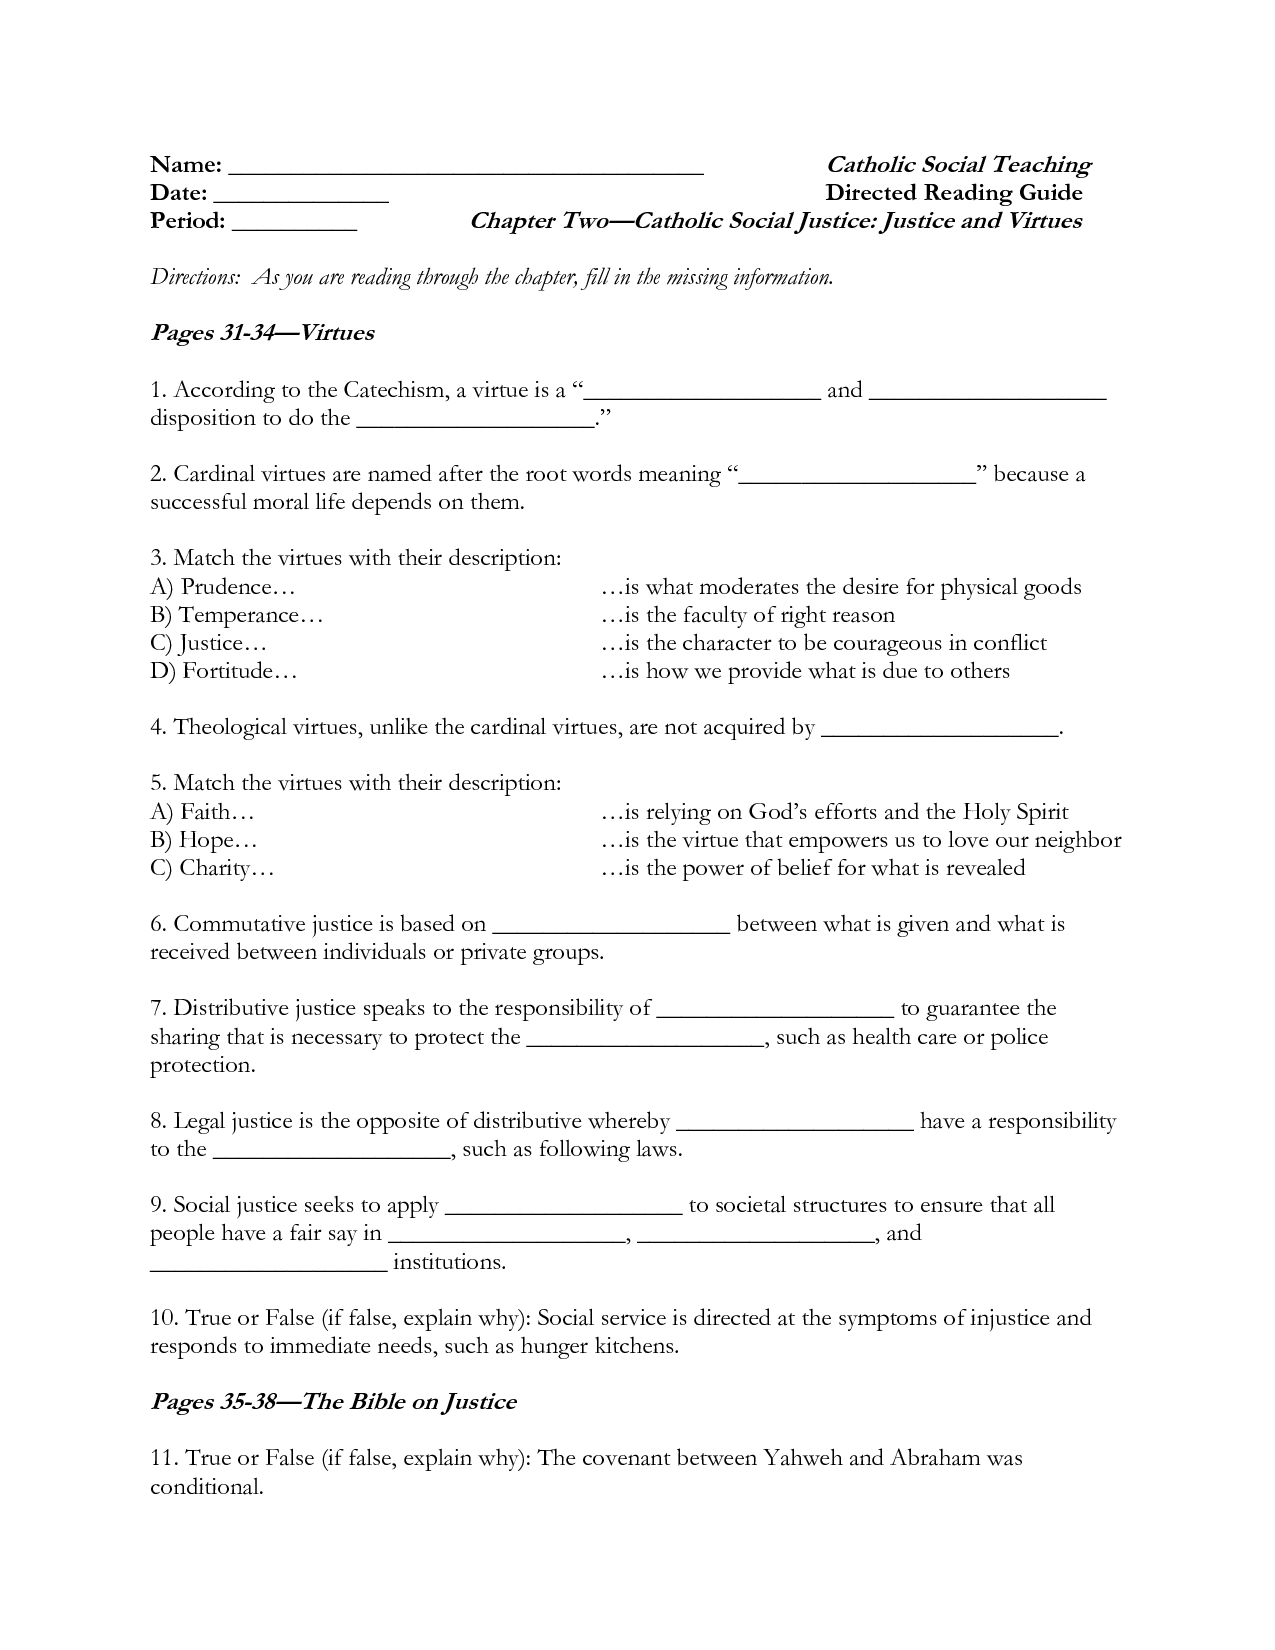 Directed Reading Worksheet Answers Image